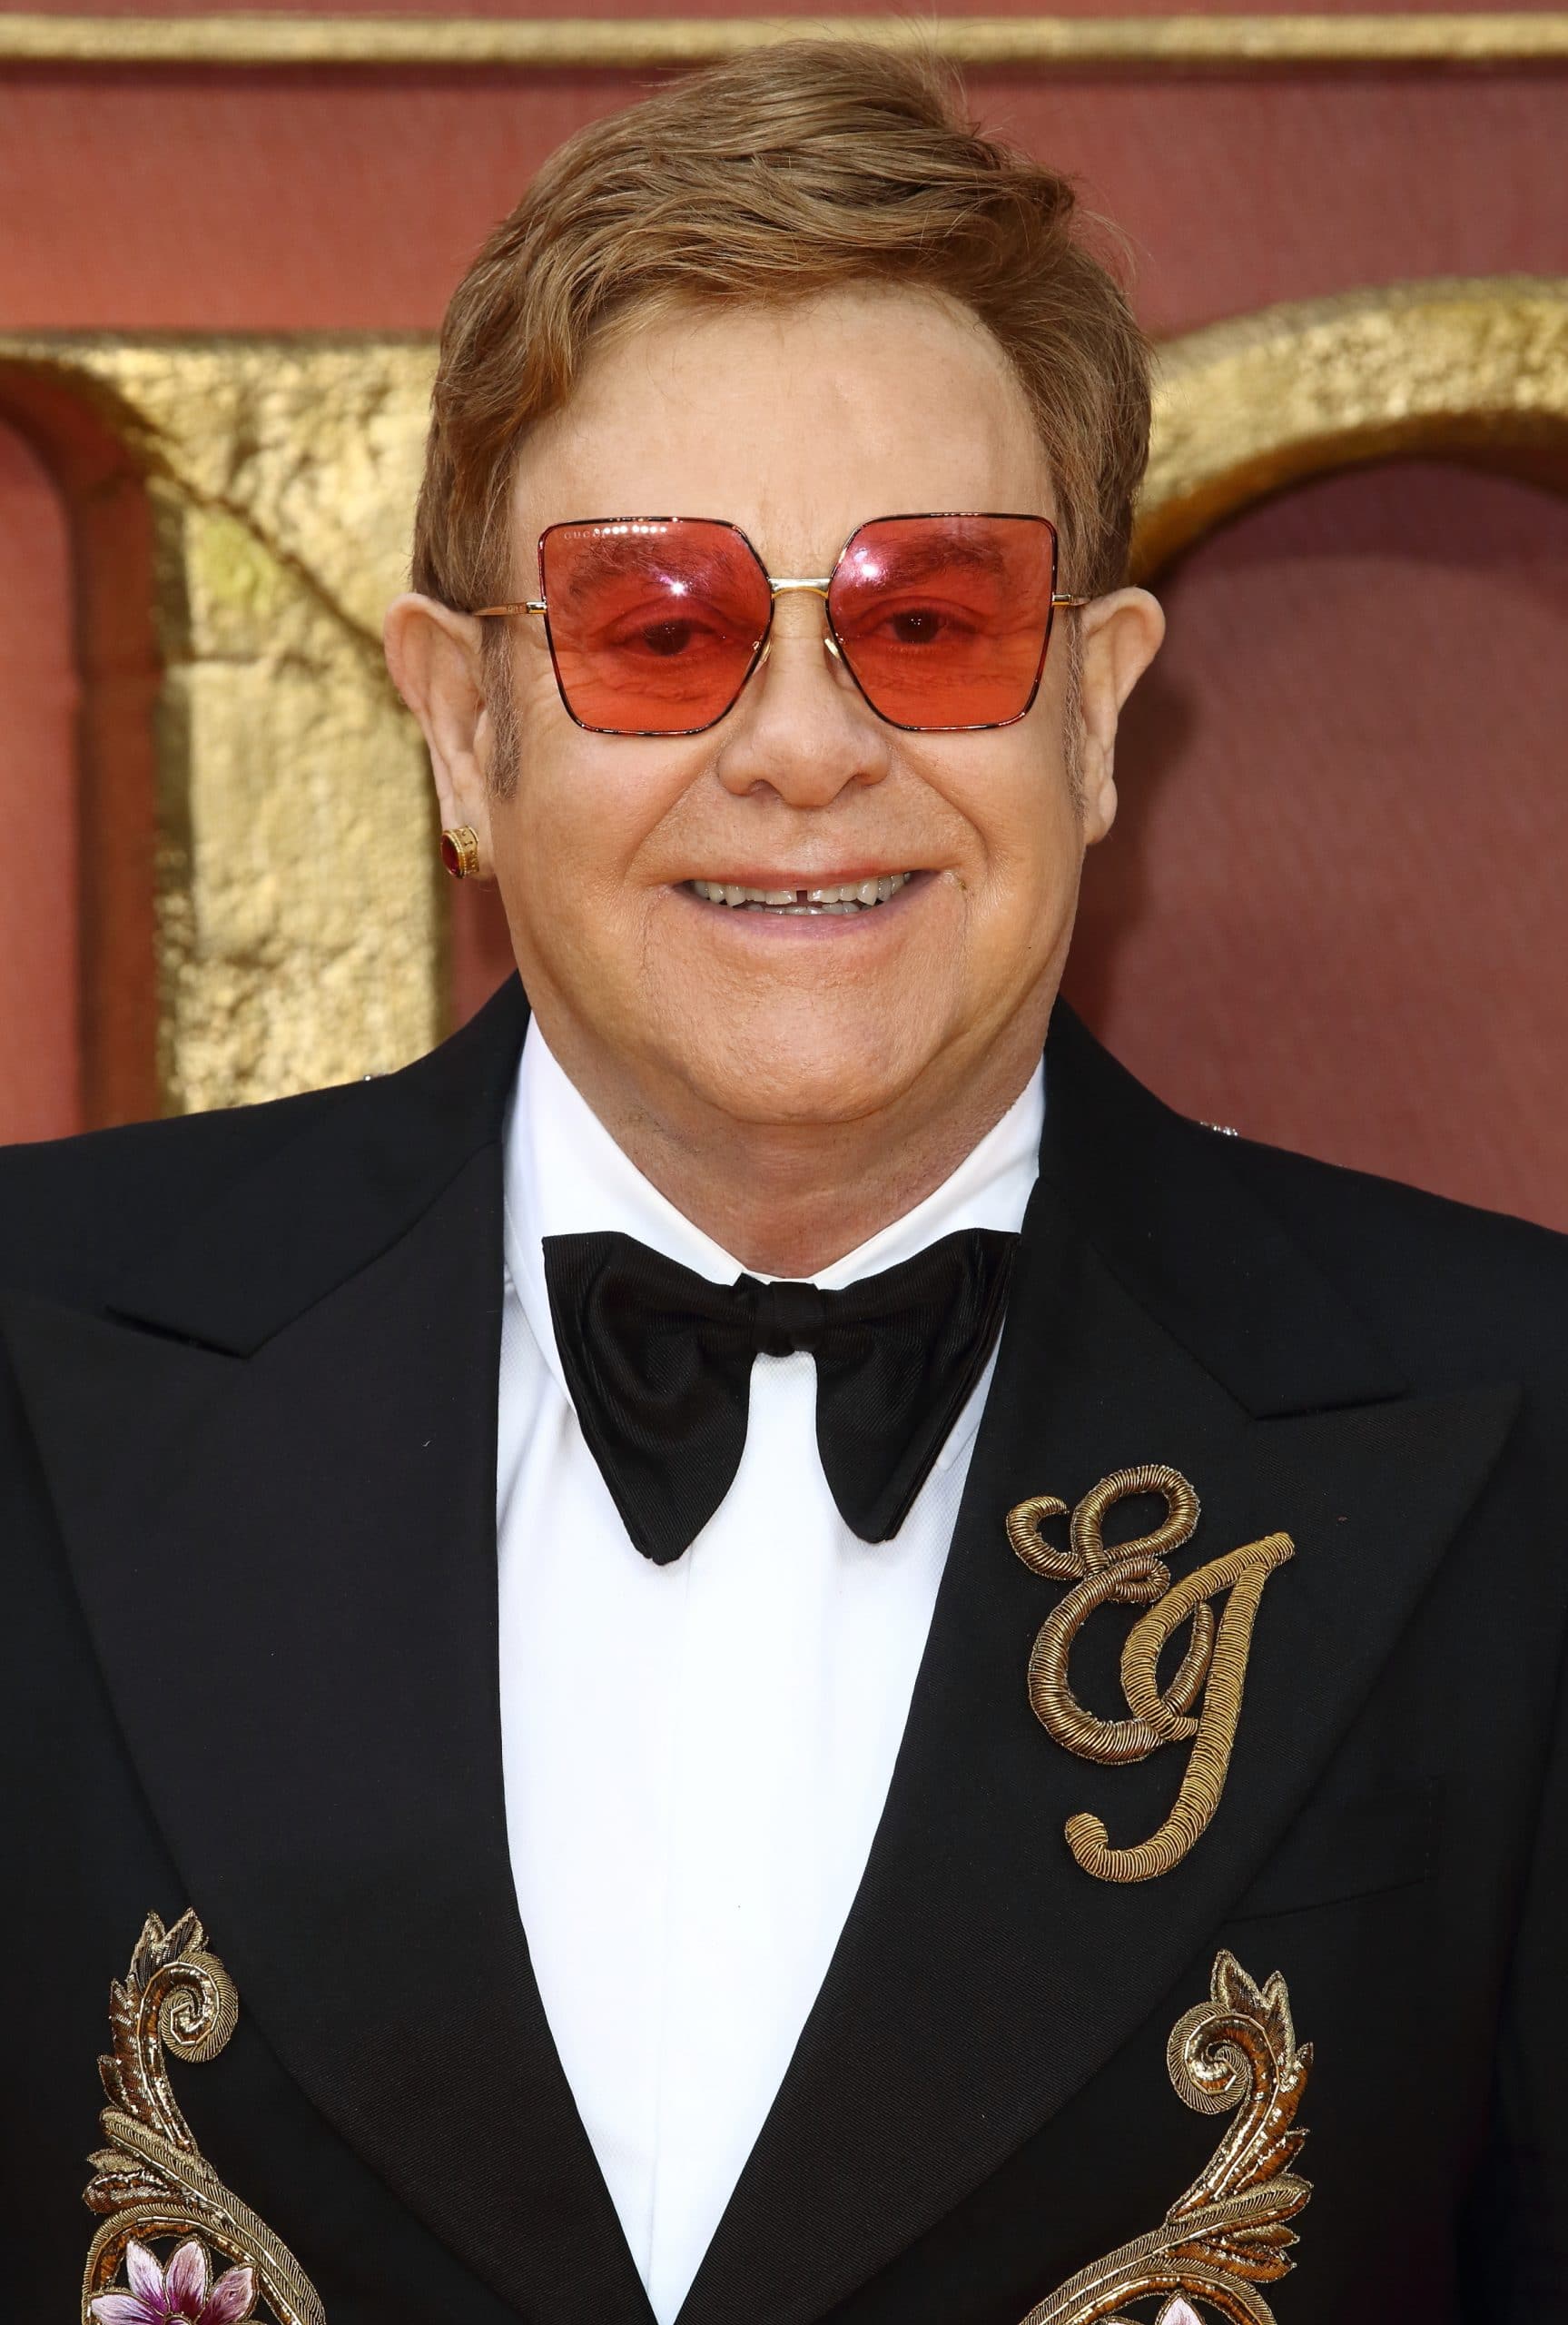 The Late Rush Limbaugh Had An Unlikely Friendship With Elton John